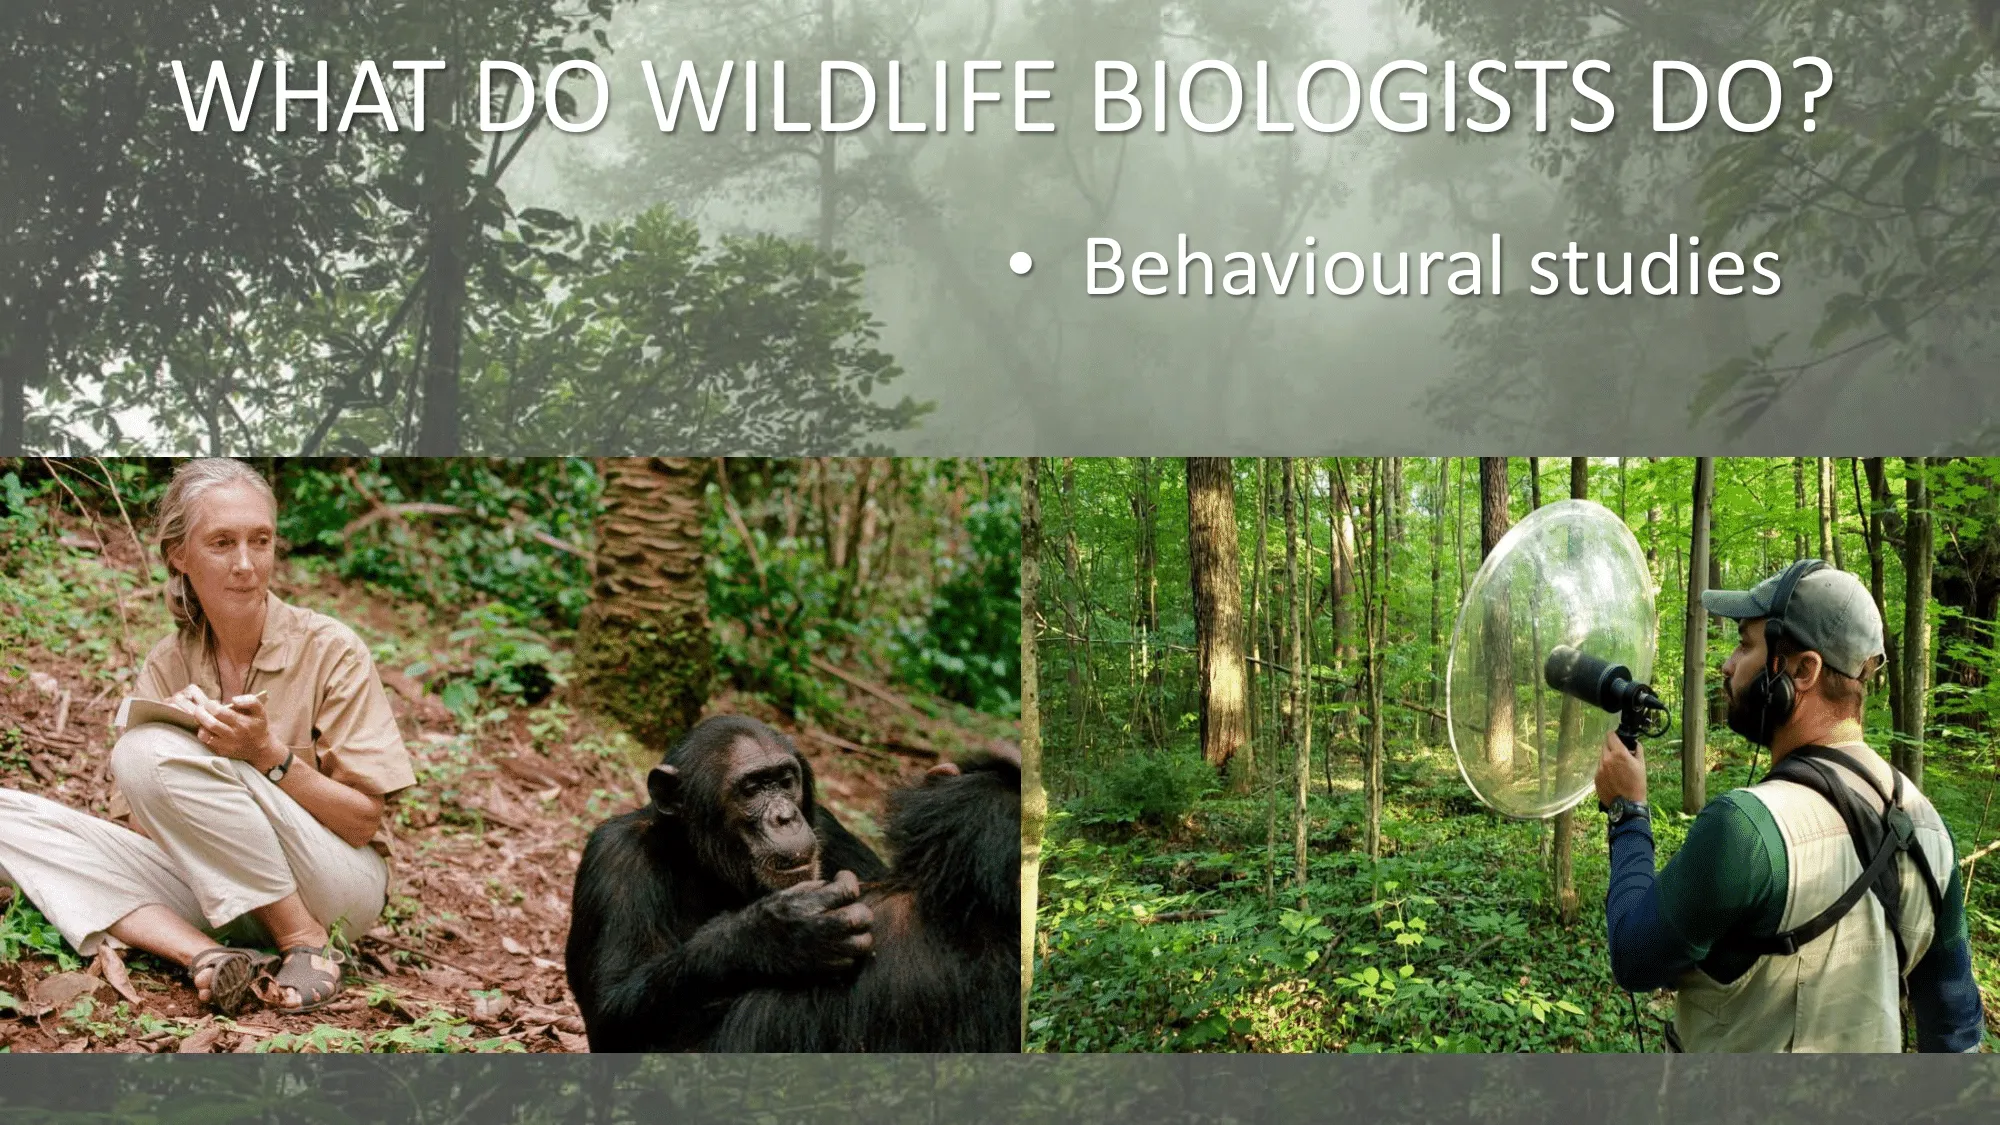 What wildlife biologists do?